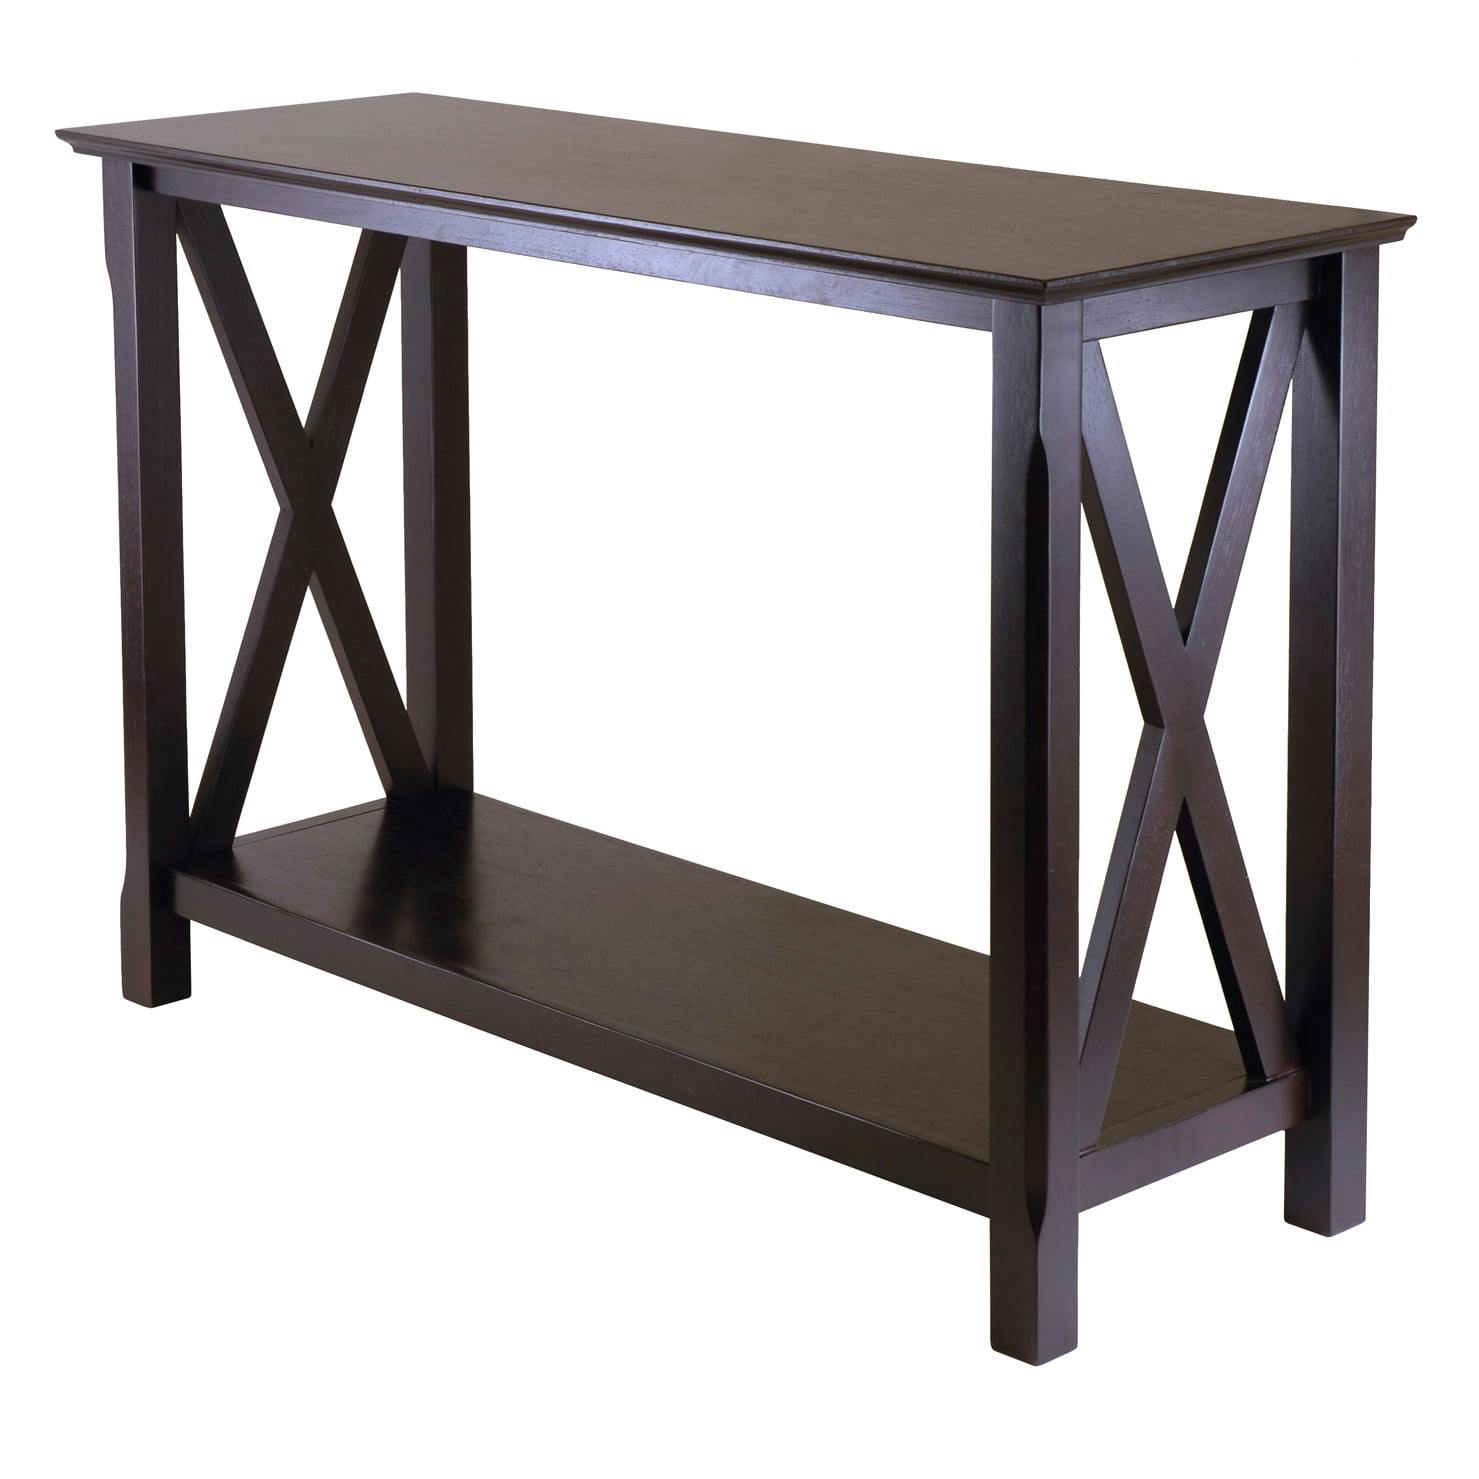 Cappuccino Elegance 45" Wood Composite Console Table with Storage